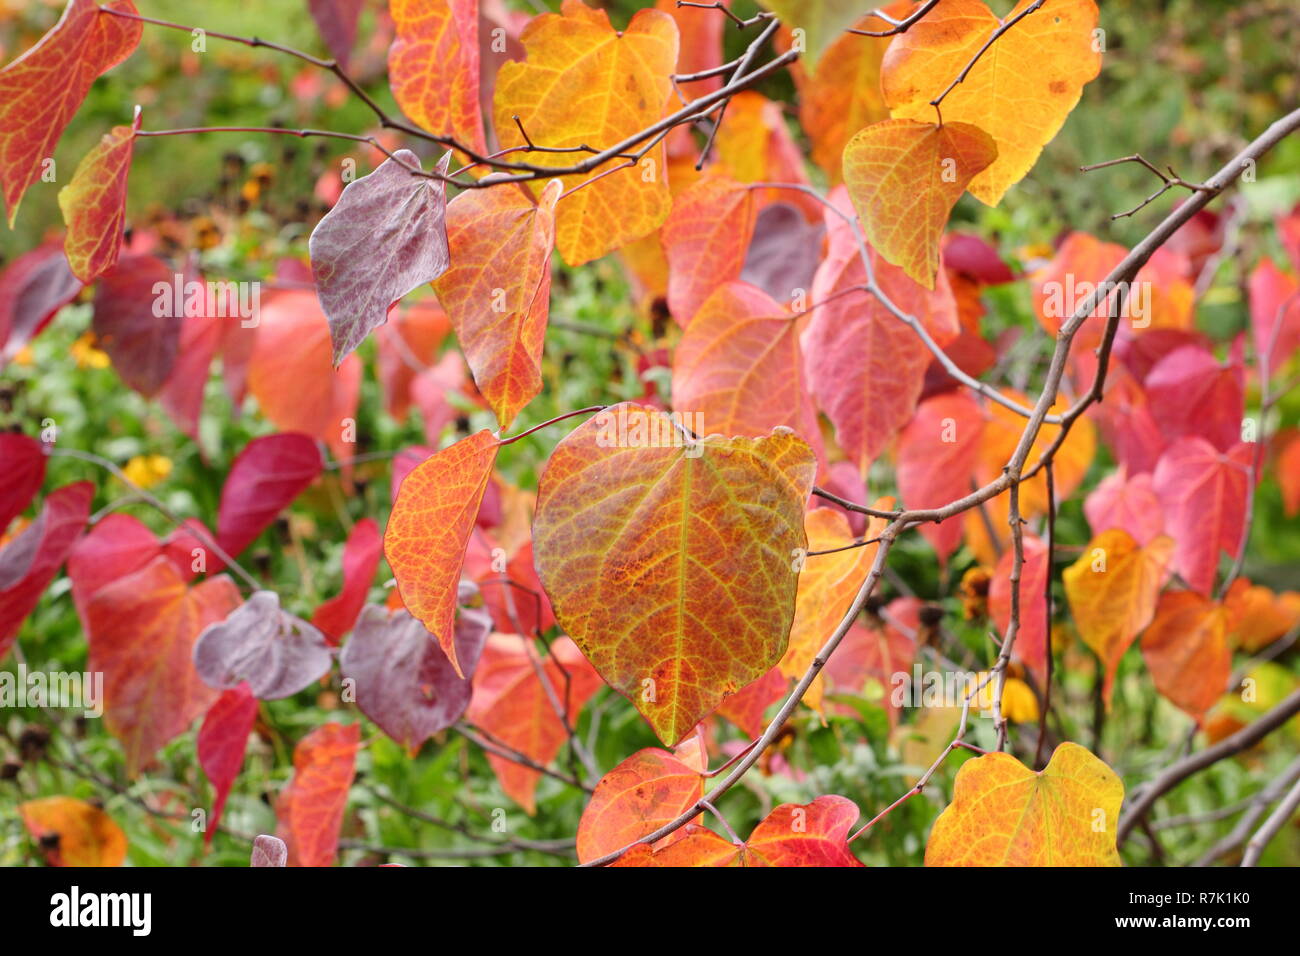 Cercis canadensis. Forest pansy tree, also called American redbud, displaying autumn leaves in an English garden, UK Stock Photo